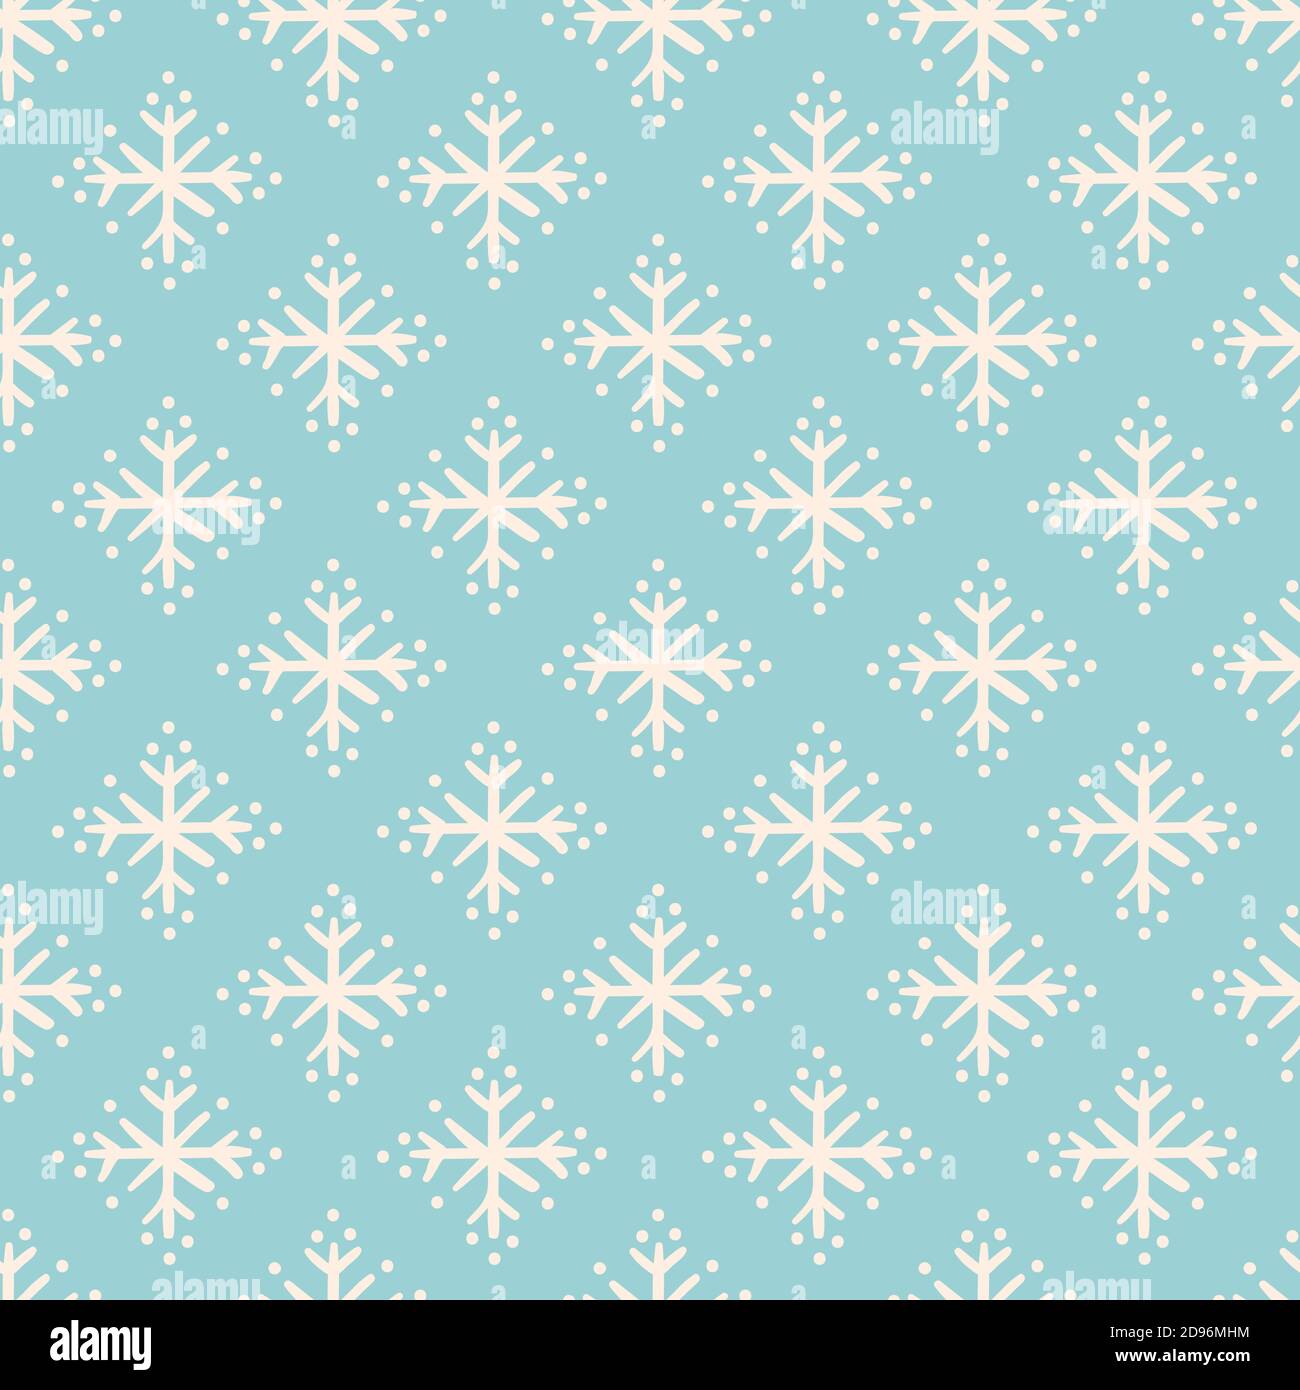 Vector geometric snowflake pattern. Seamless vector design, simple stylized ice crystal on bright blue background. Half drop abstract design. Perfect for paper projects, fabric and home decor. Stock Vector